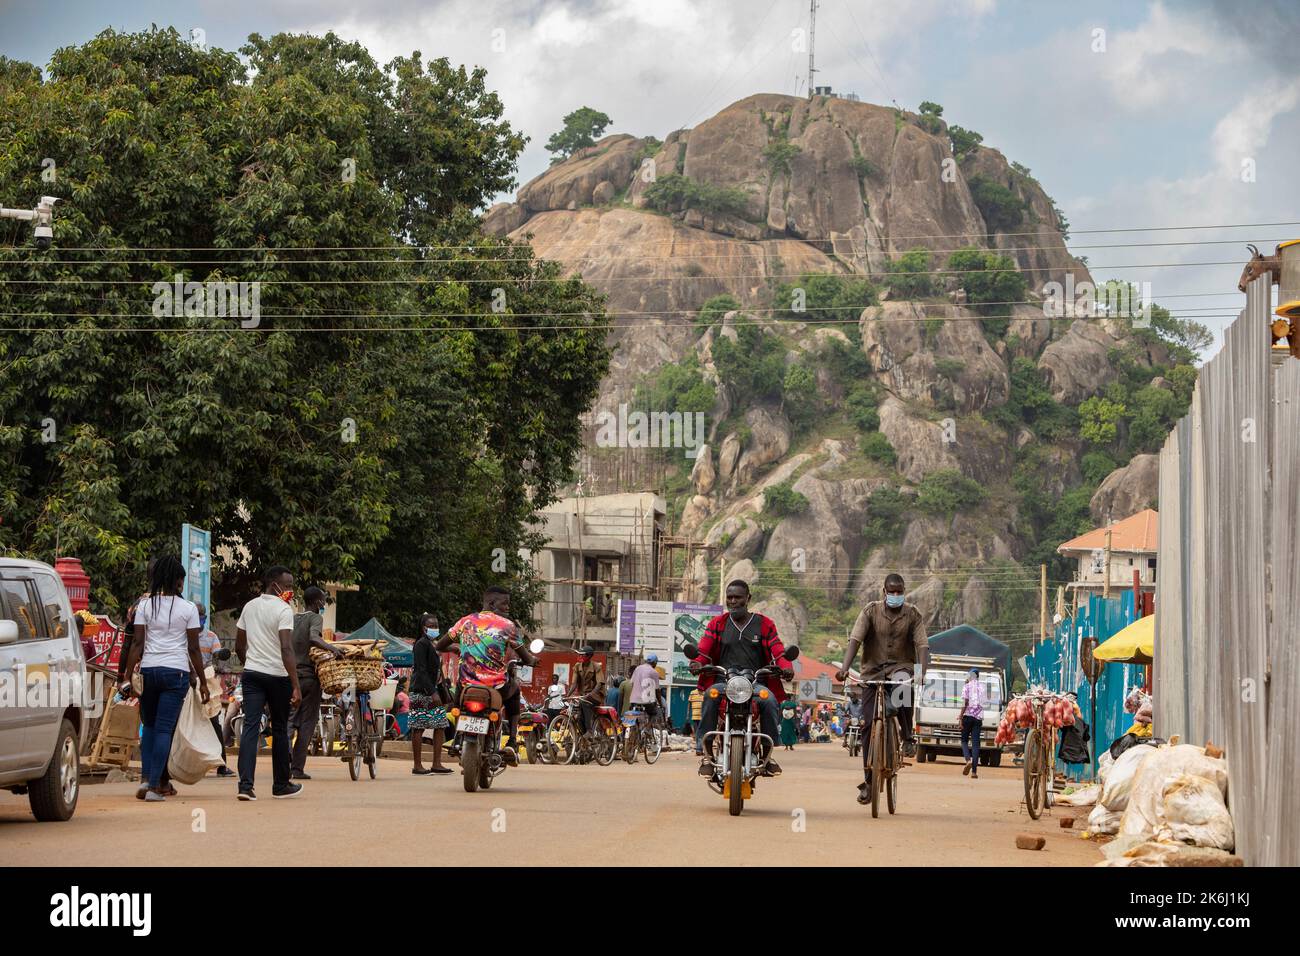 The town of Soroti, Uganda, is dominated by a large volcanic plug rising over its busy streets. Uganda, East Africa Stock Photo